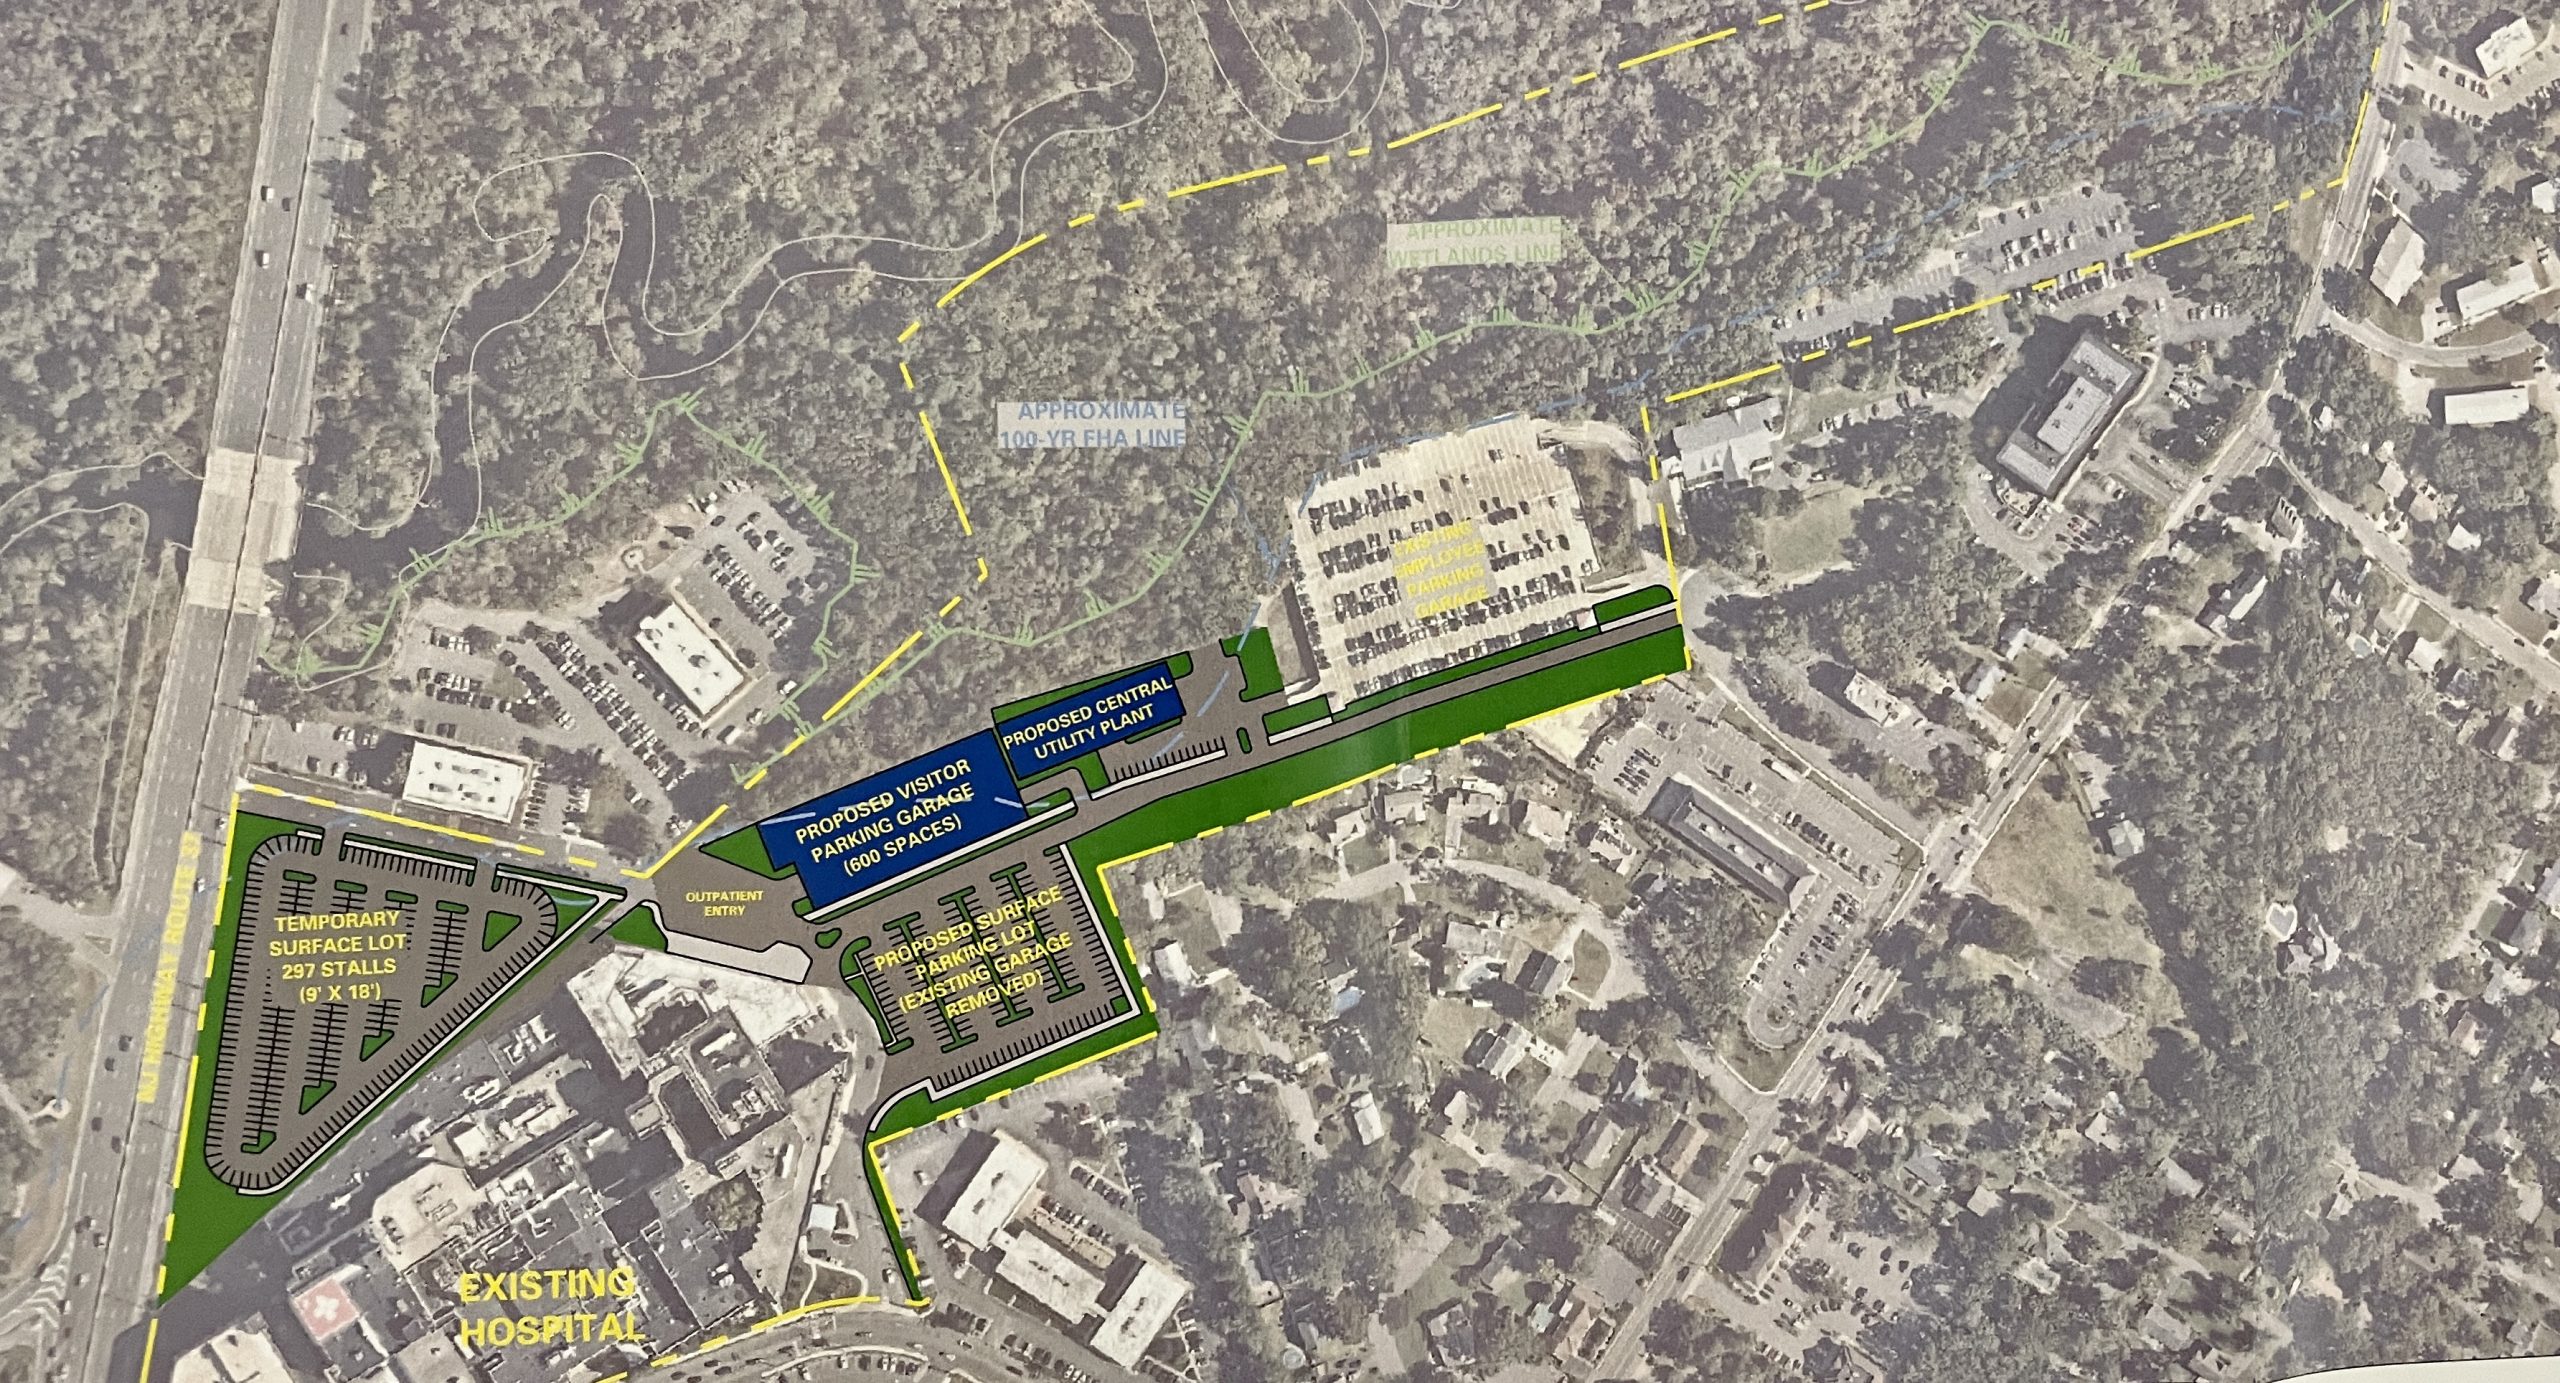 Community Medical Center's proposed expansion plans. (Photo: Daniel Nee/Planning Document)